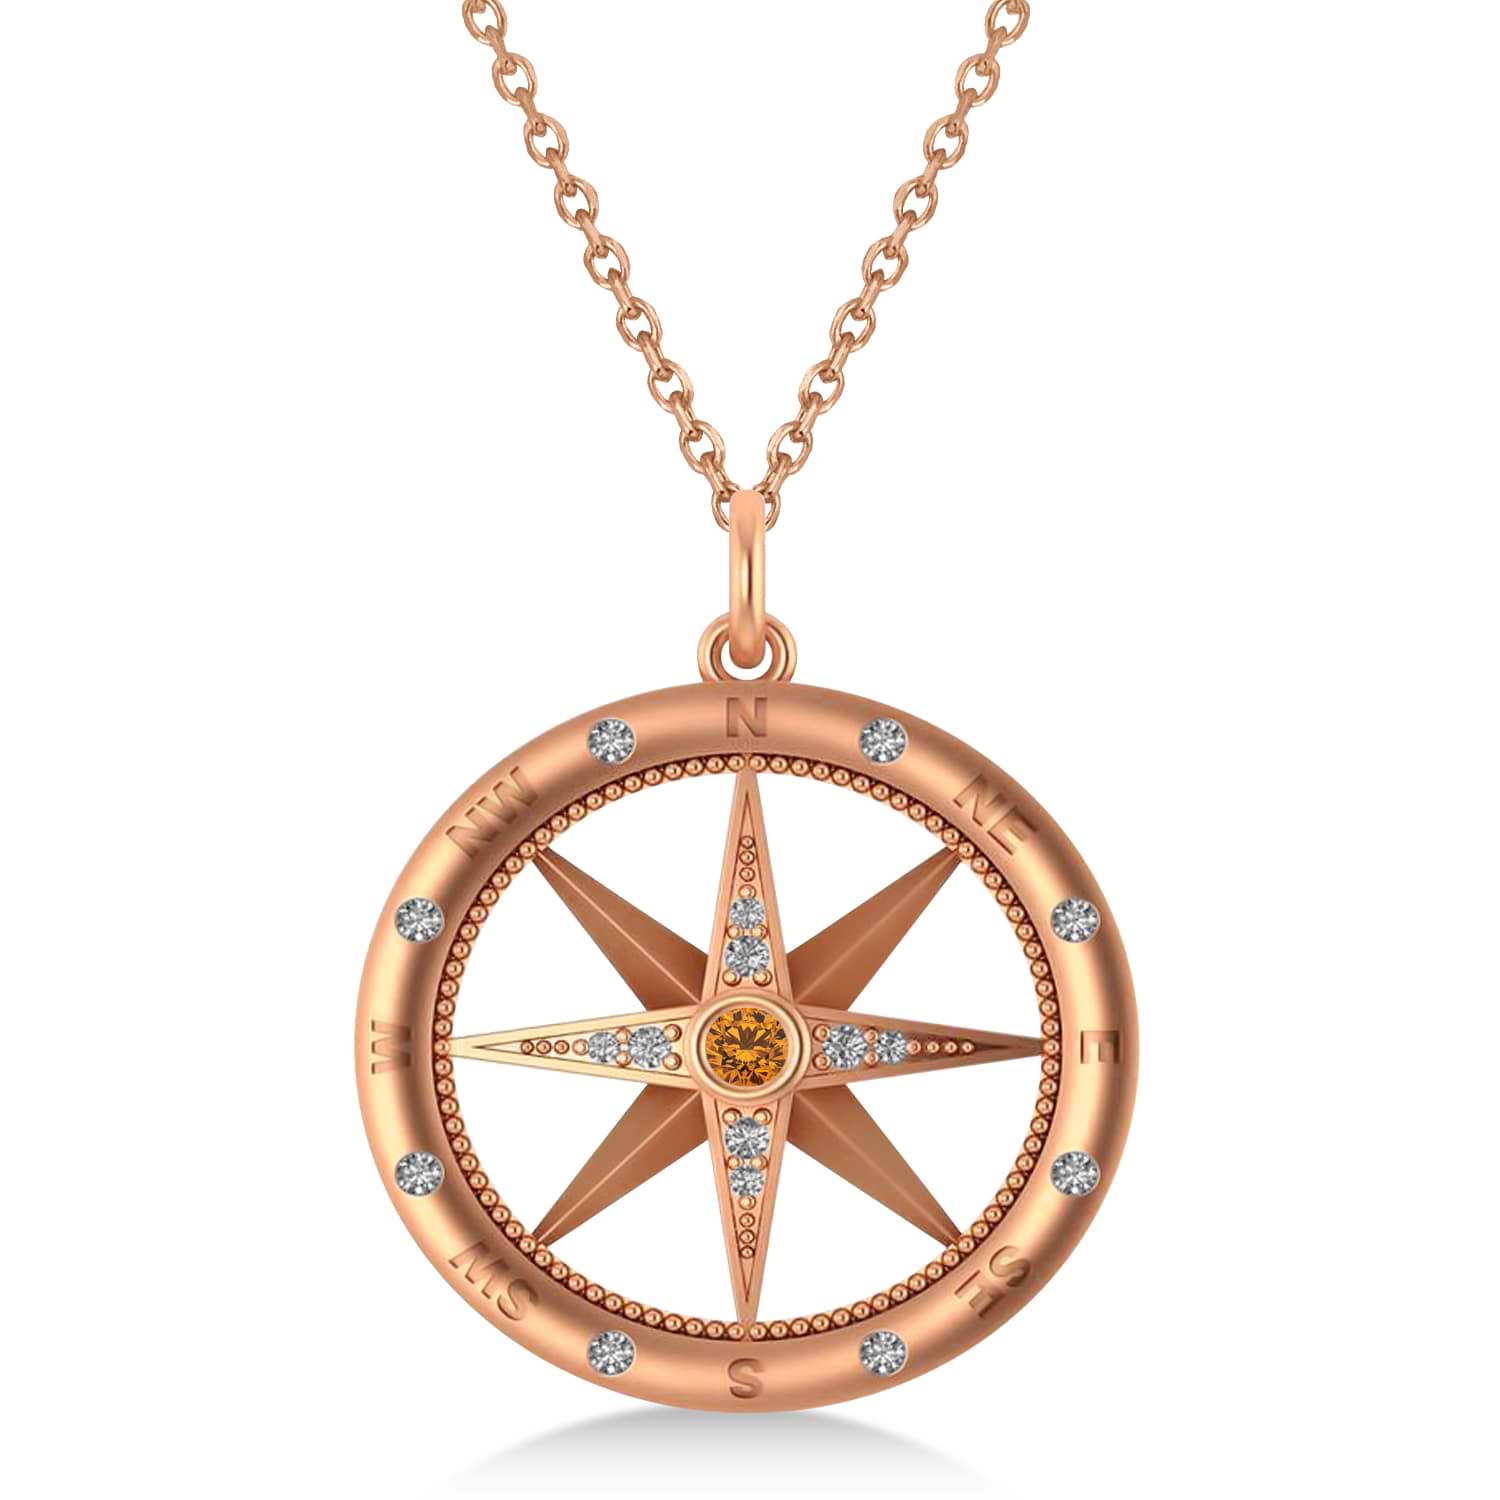 Large Compass Pendant For Men Citrine & Diamond Accented 14k Rose Gold (0.38ct)